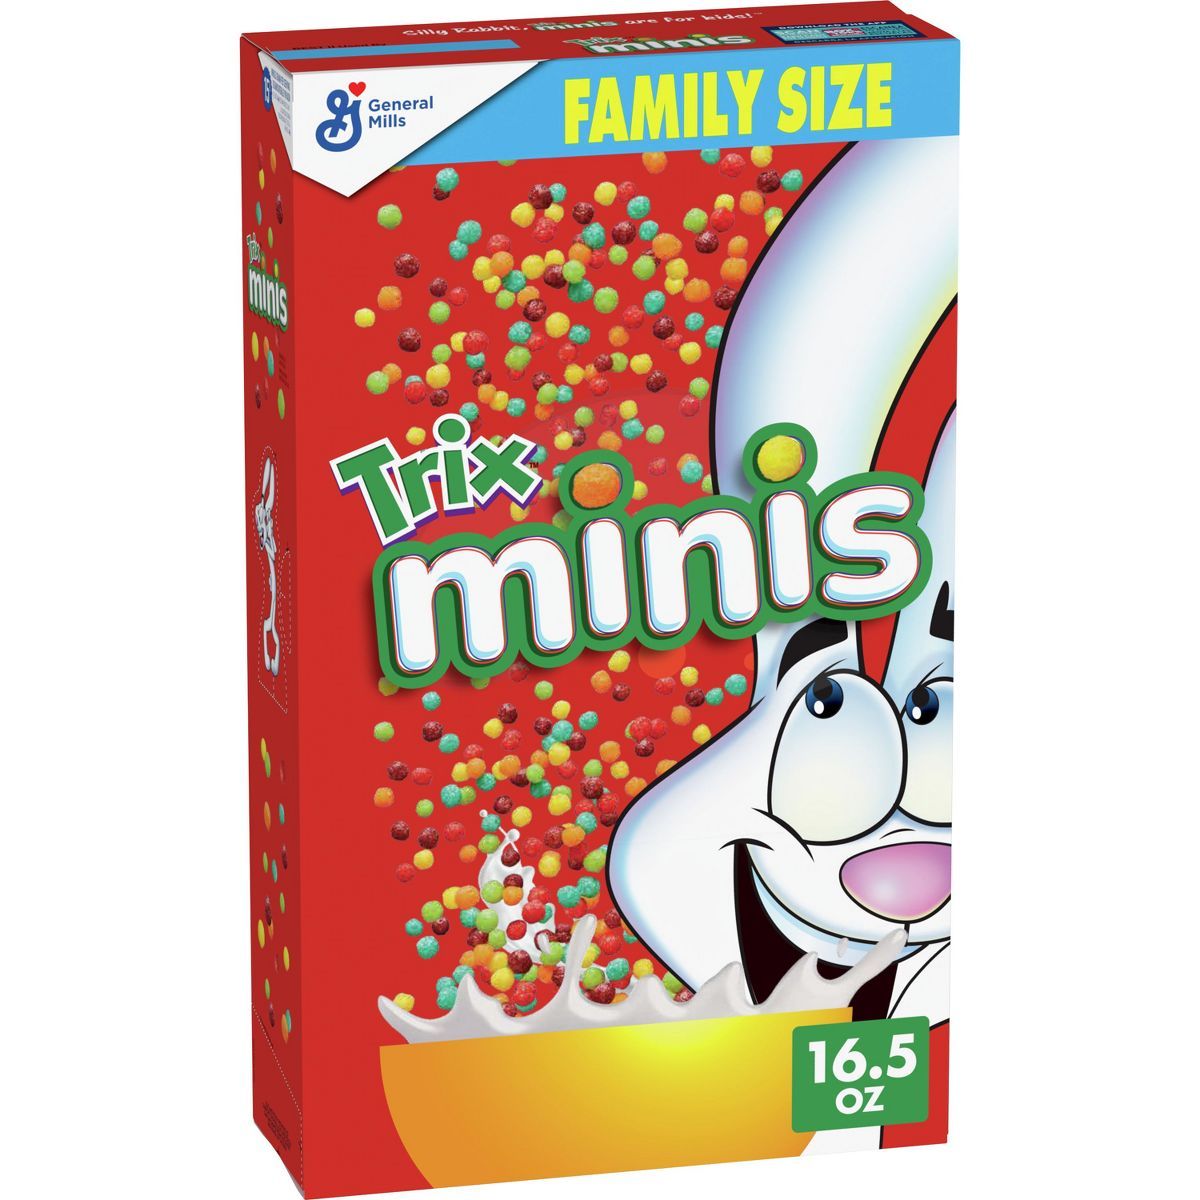 Trix Minis Family Size Cereal - 16.5oz - General Mills | Target